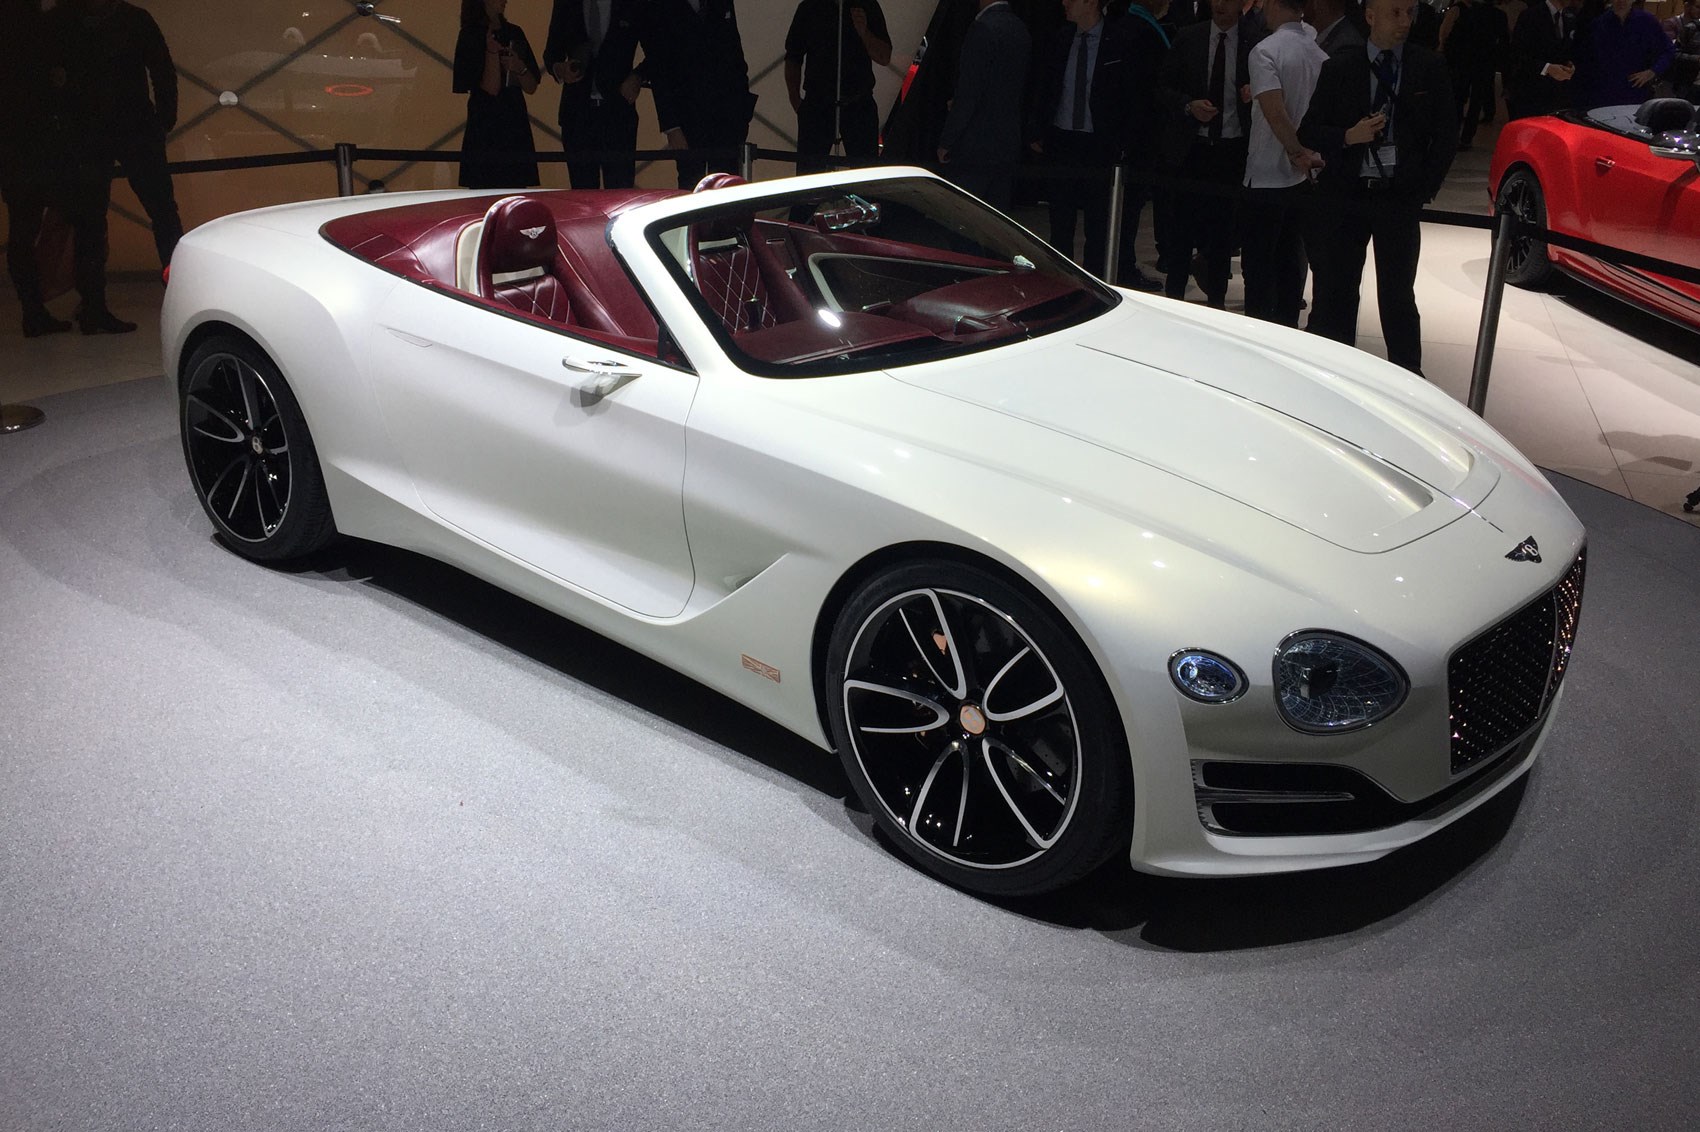 Bentley’s EXP12 Speed 6e roadster concept runs only on electricity